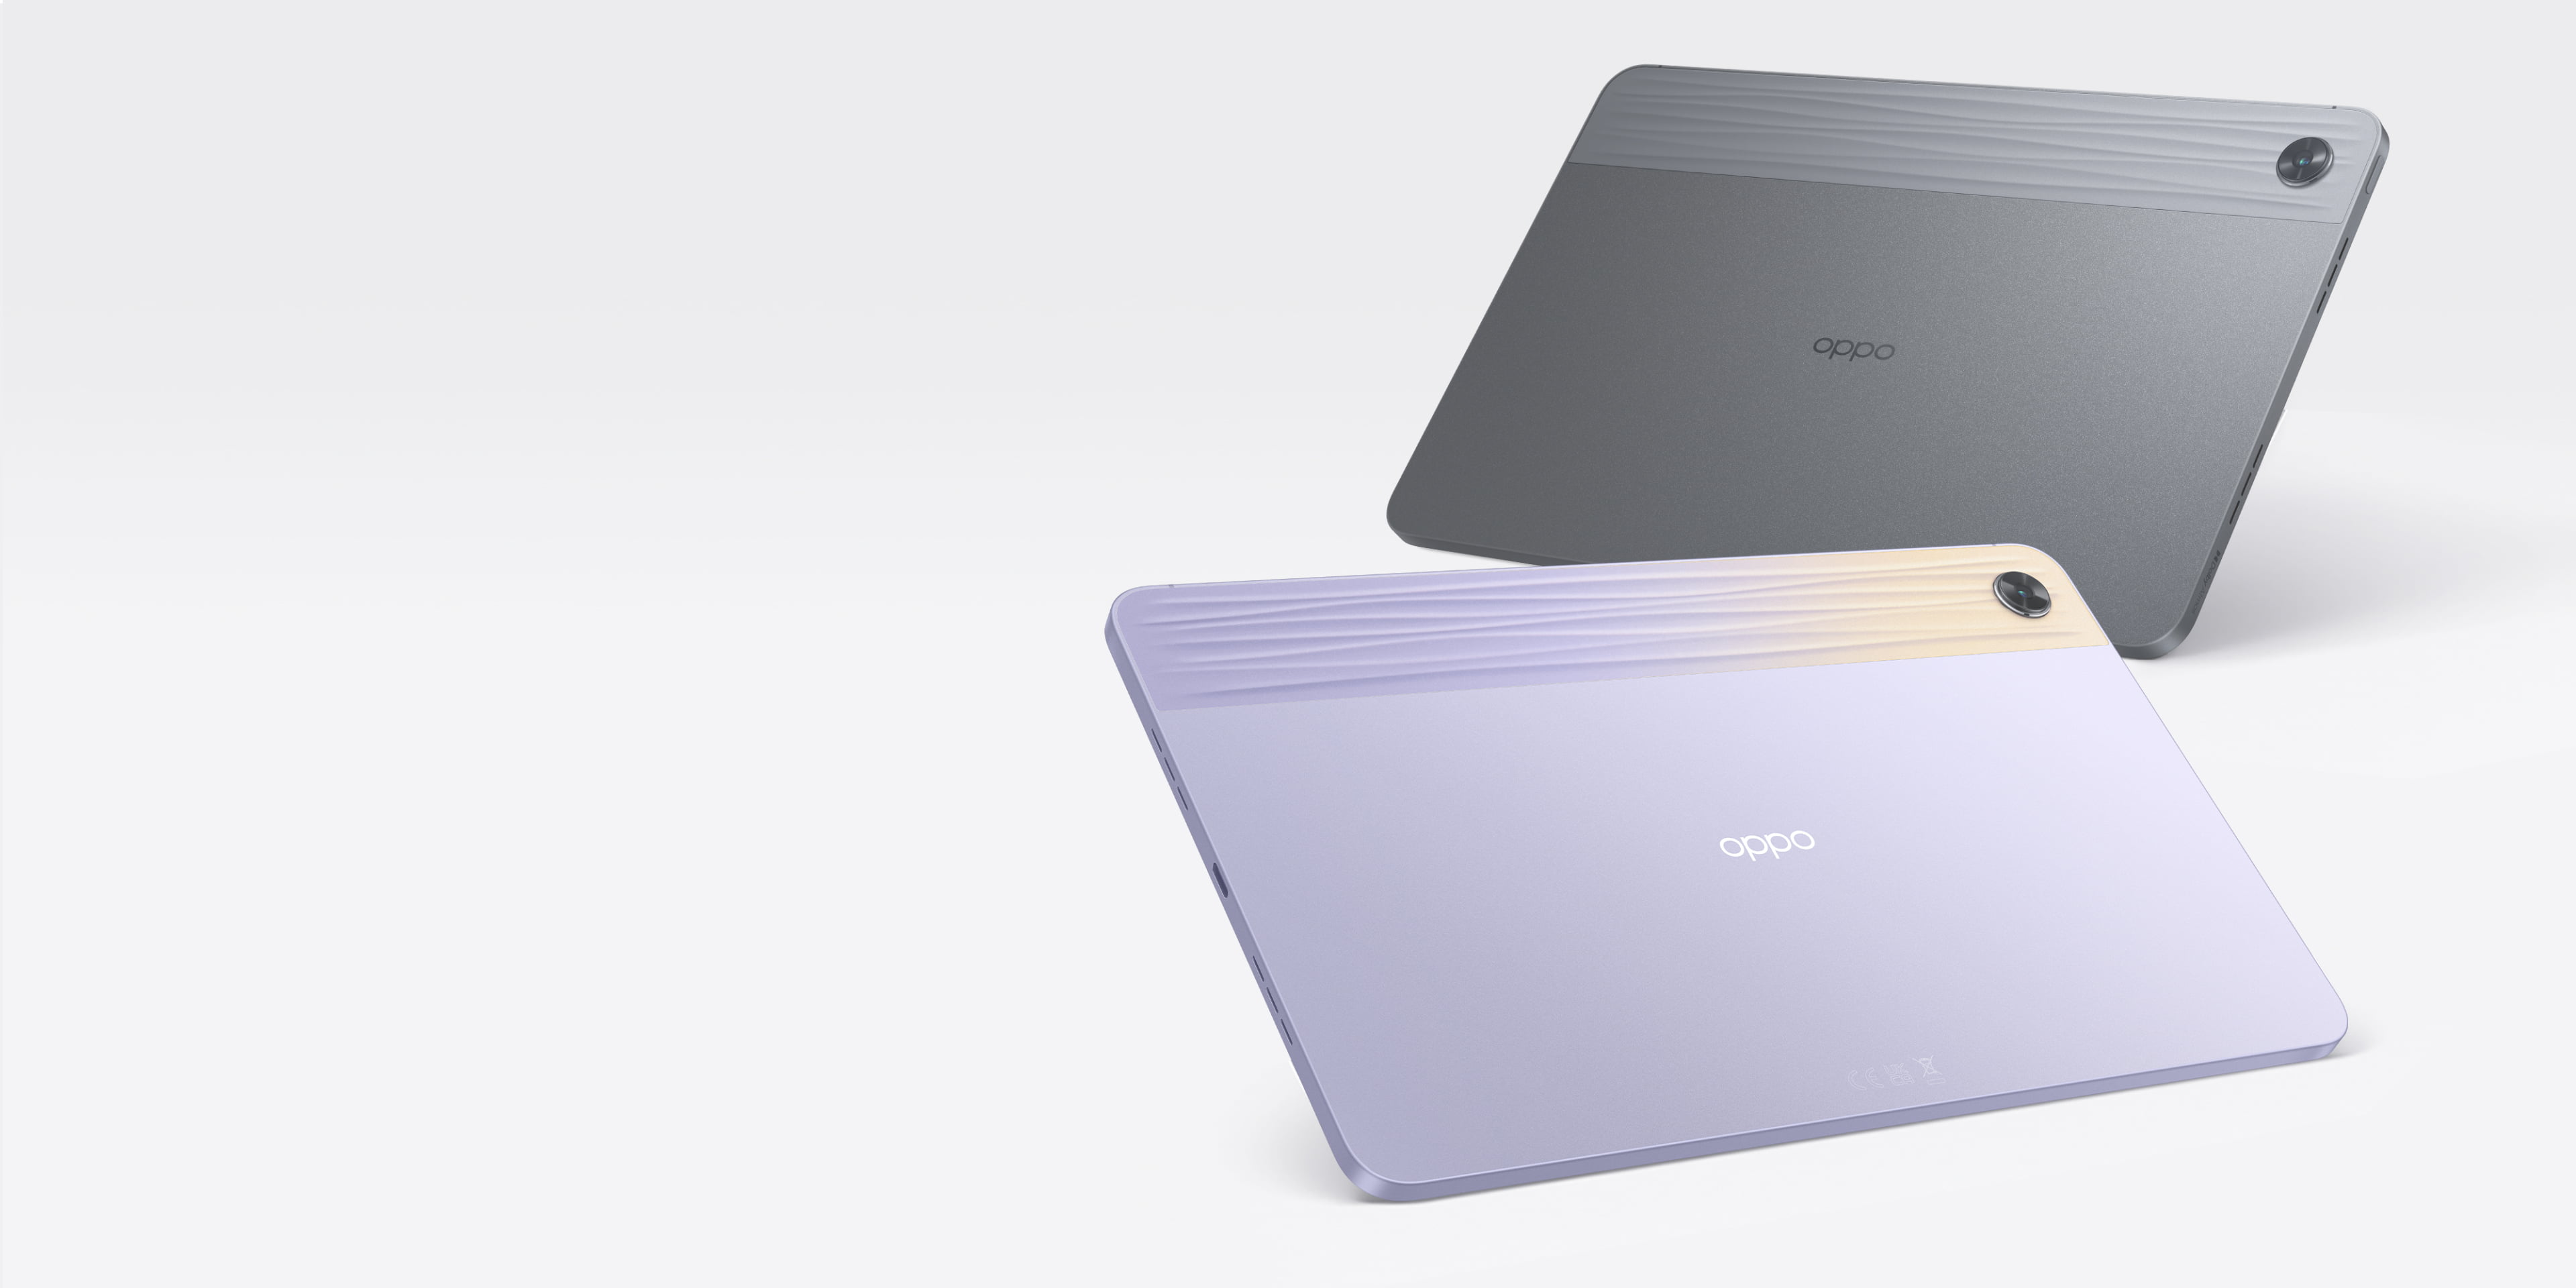 Oppo Pad Air 4/64. Oppo Pad 2. Дисплей Oppo Pad Air Qlty-100. Планшет Oppo Pad Air opd2102a 128gb Grey. Oppo air 3 купить